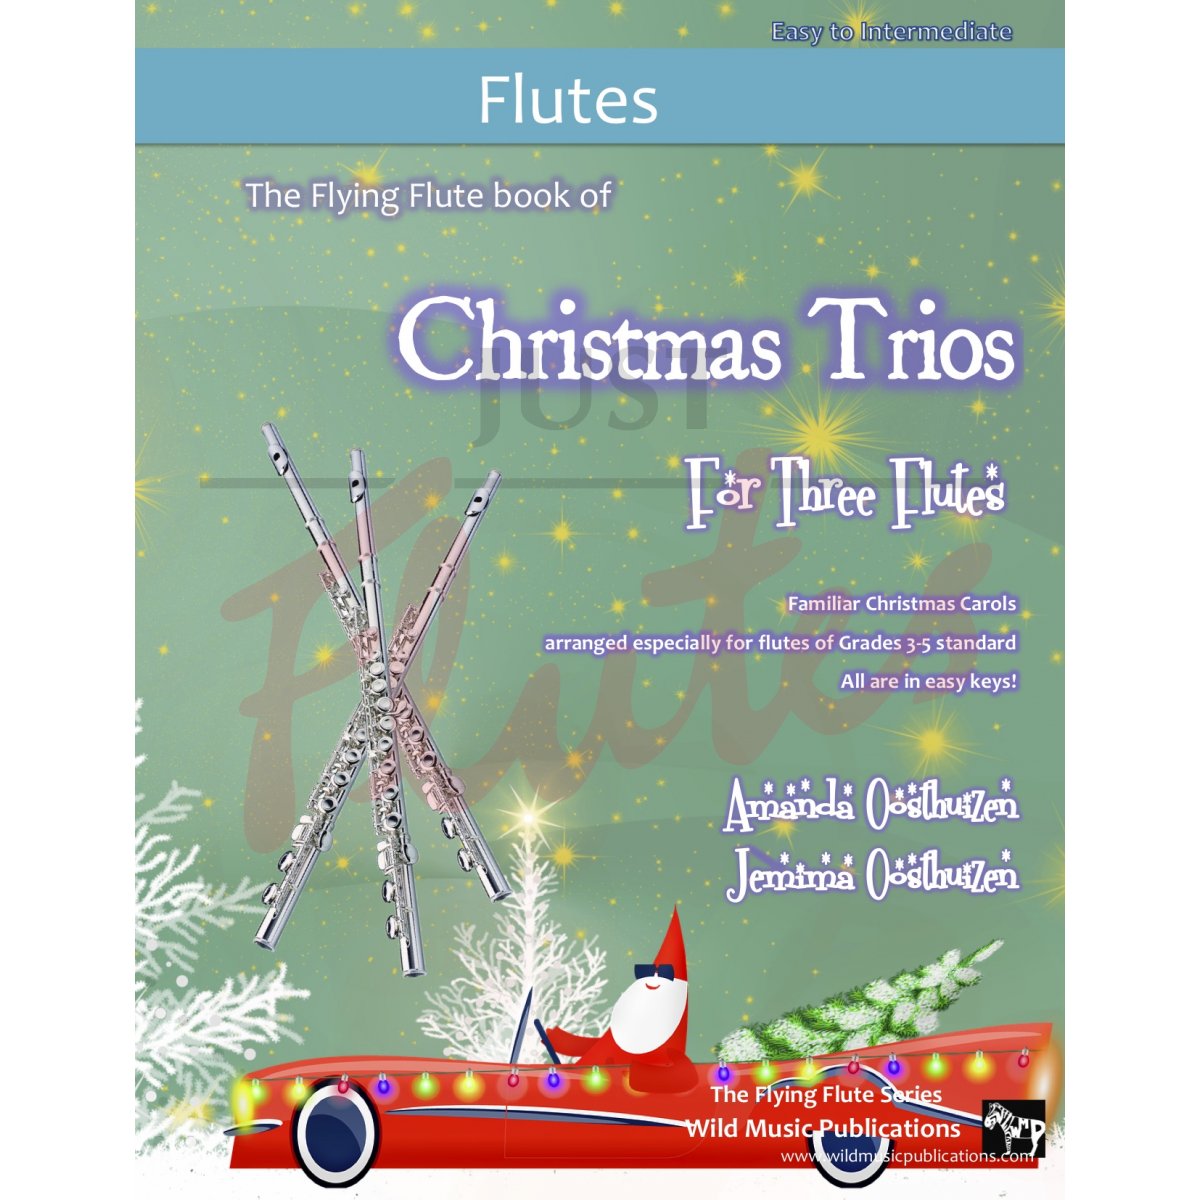 The Flying Flute Christmas Trios for Three Flutes